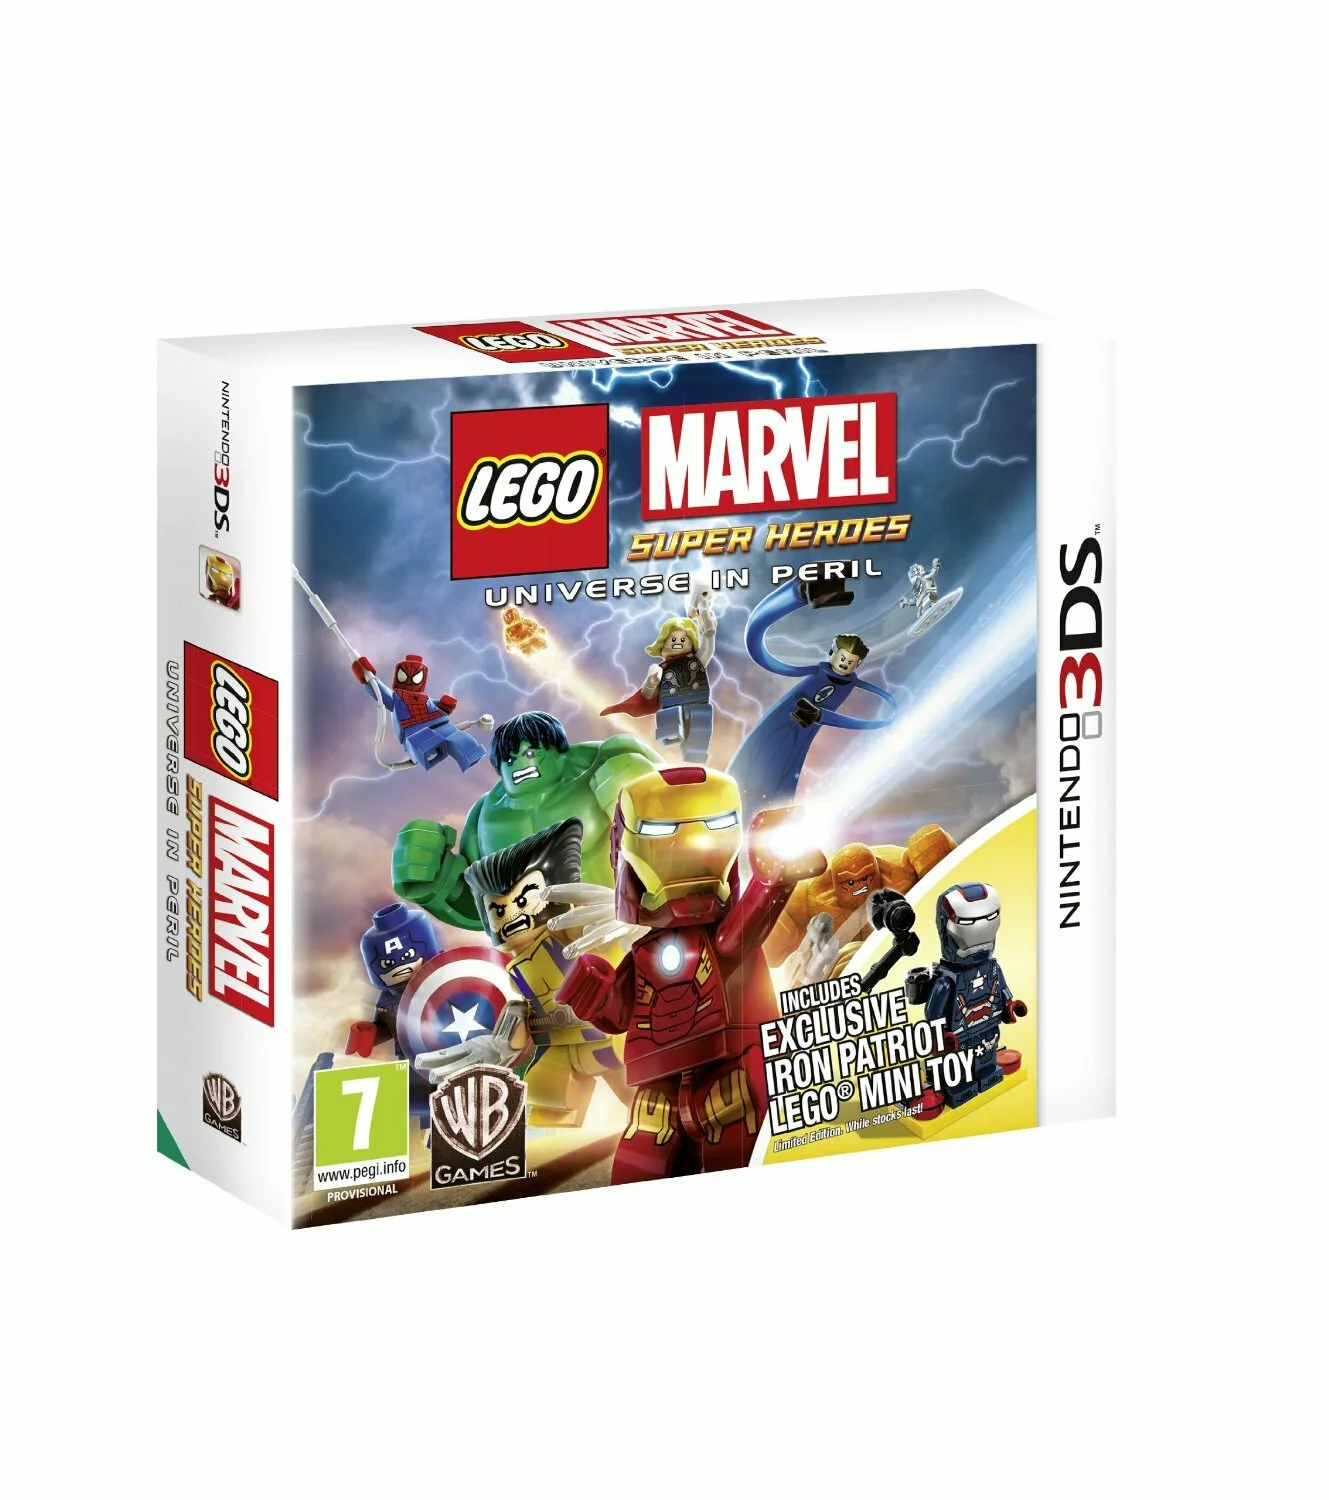 LEGO_Marvel_Super_Heroes_Universe_in_Peril_Iron_Patriot_Minifigure_Limited_Edition_3DS